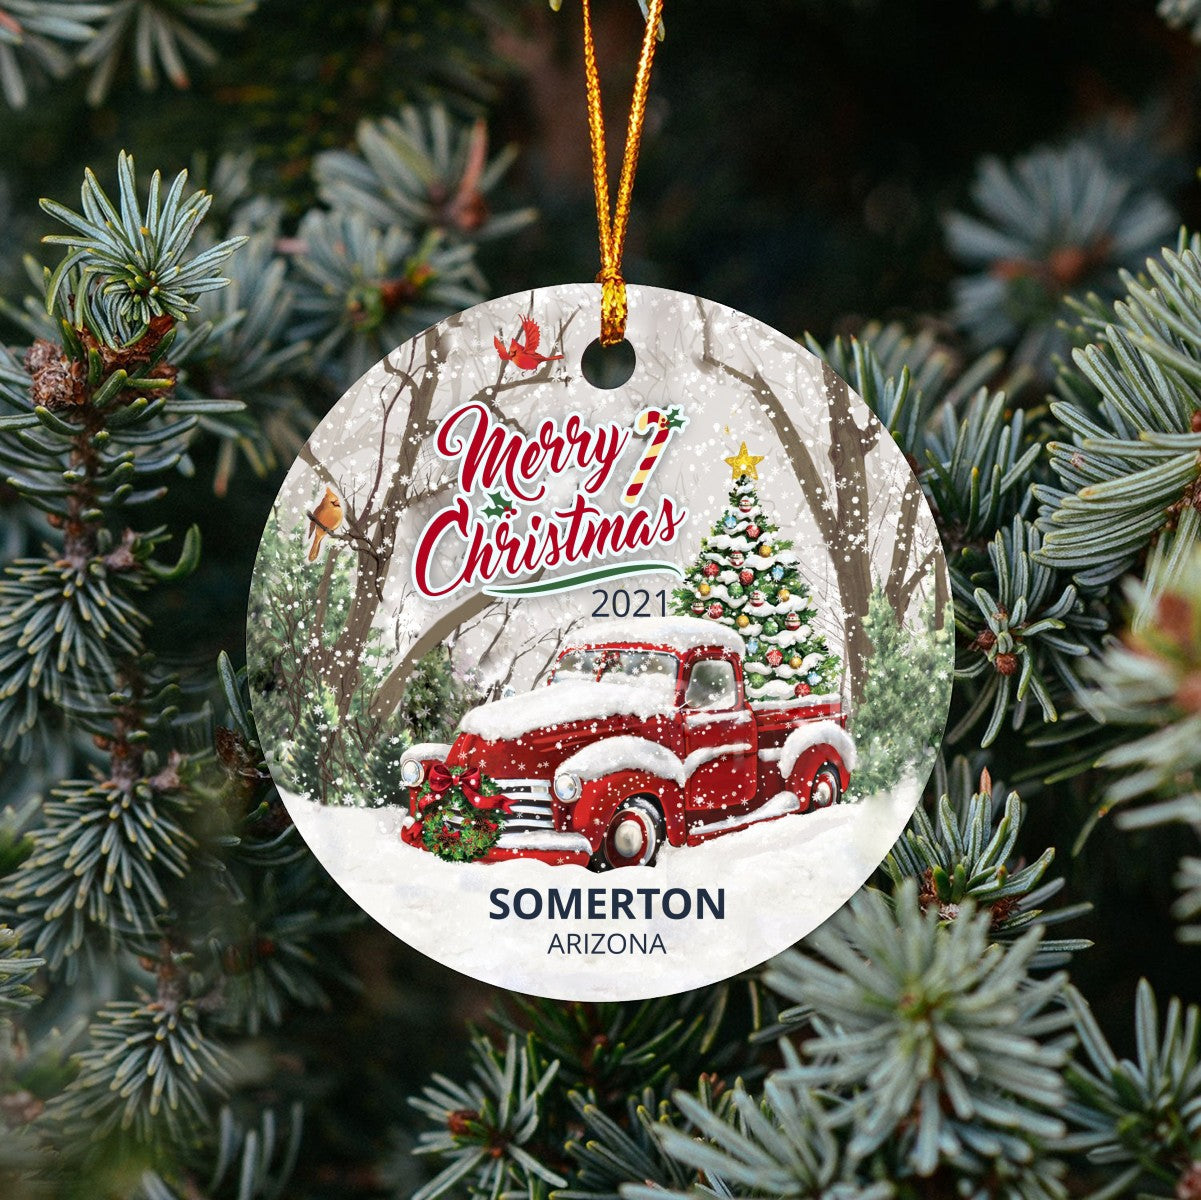 Christmas Tree Ornaments Somerton - Ornament Customize With Name City And State Somerton Arizona AZ - Red Truck Xmas Ornaments 3'' Plastic Gift For Family, Friend And Housewarming